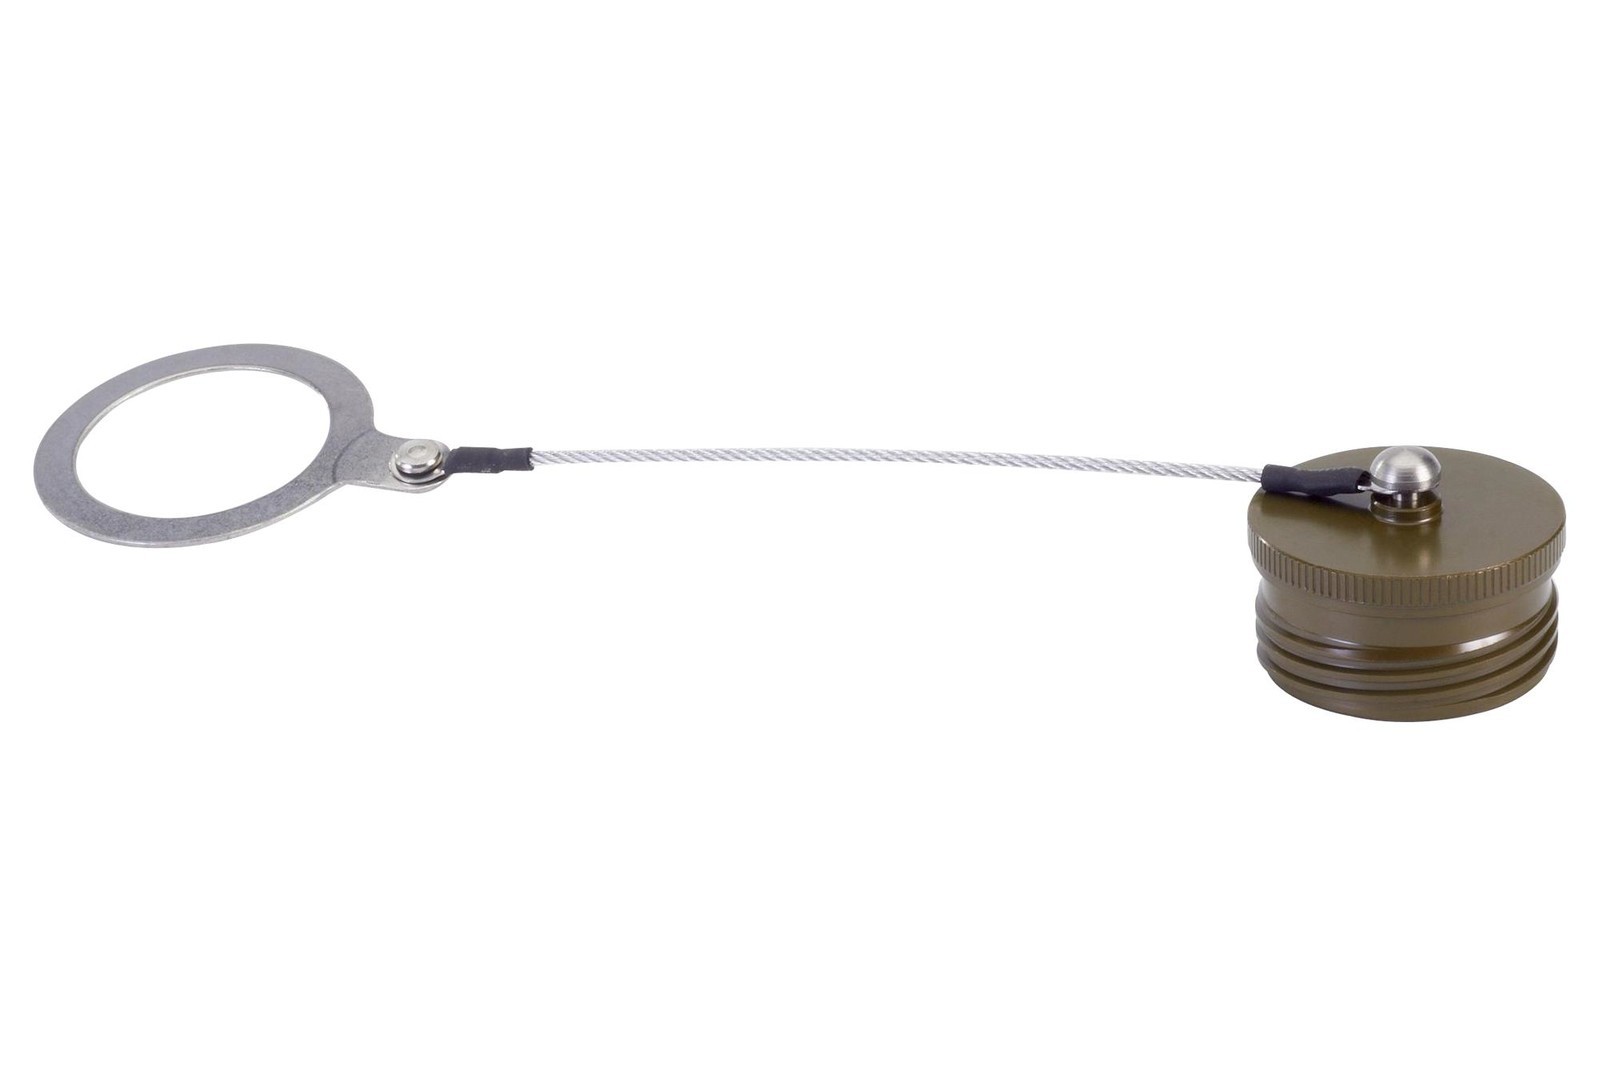 Amphenol Pcd D38999/32W21N Dust Cap W/rope And Ring, Size 21